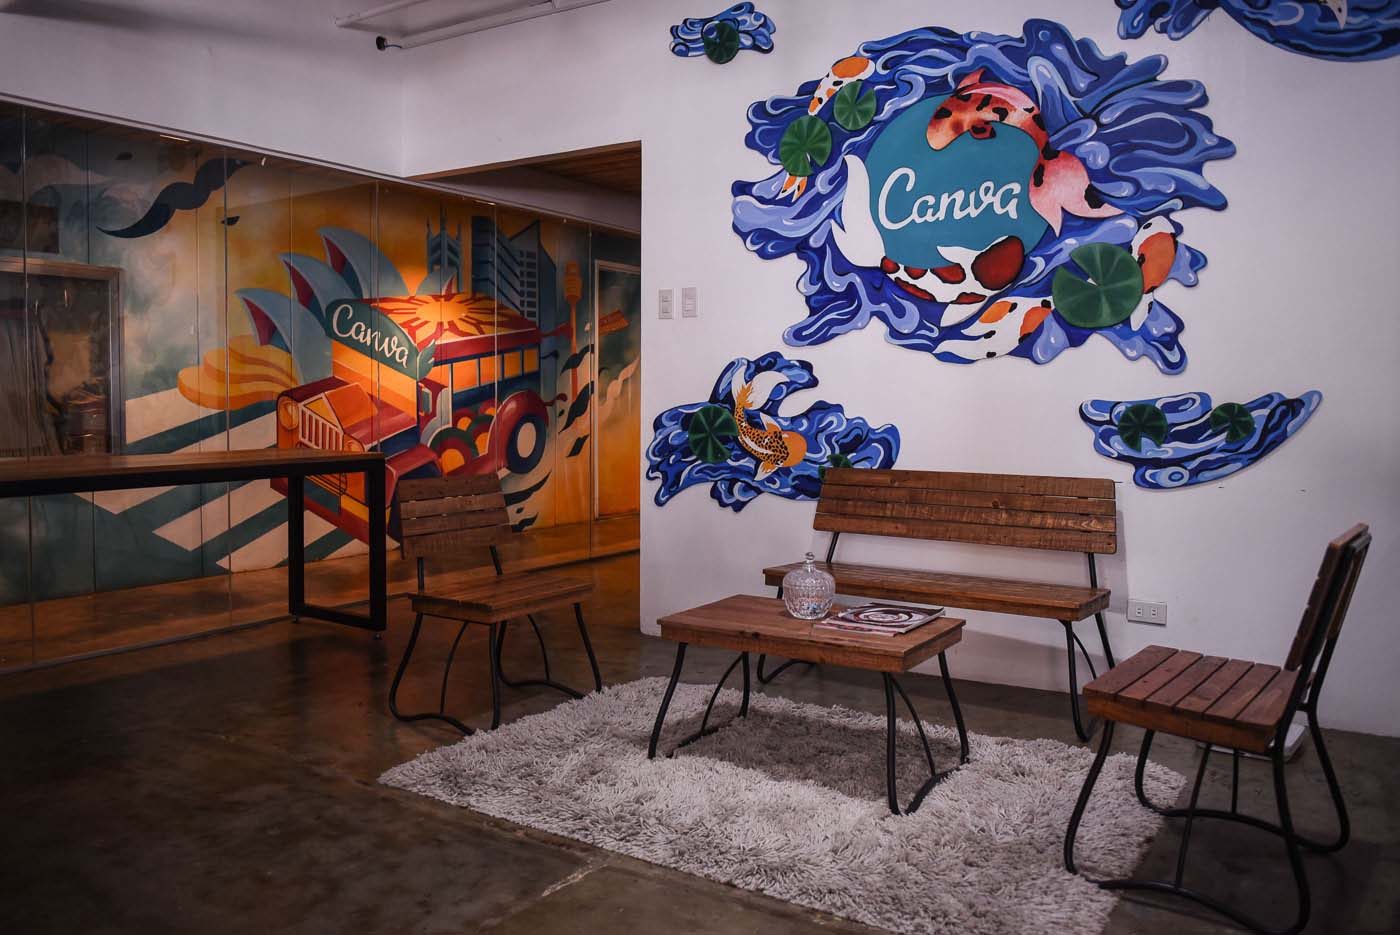 One of the many nooks in Canva where employees and visitors alike can lounge or work in. All photos by Leanne Jazul/Rappler 